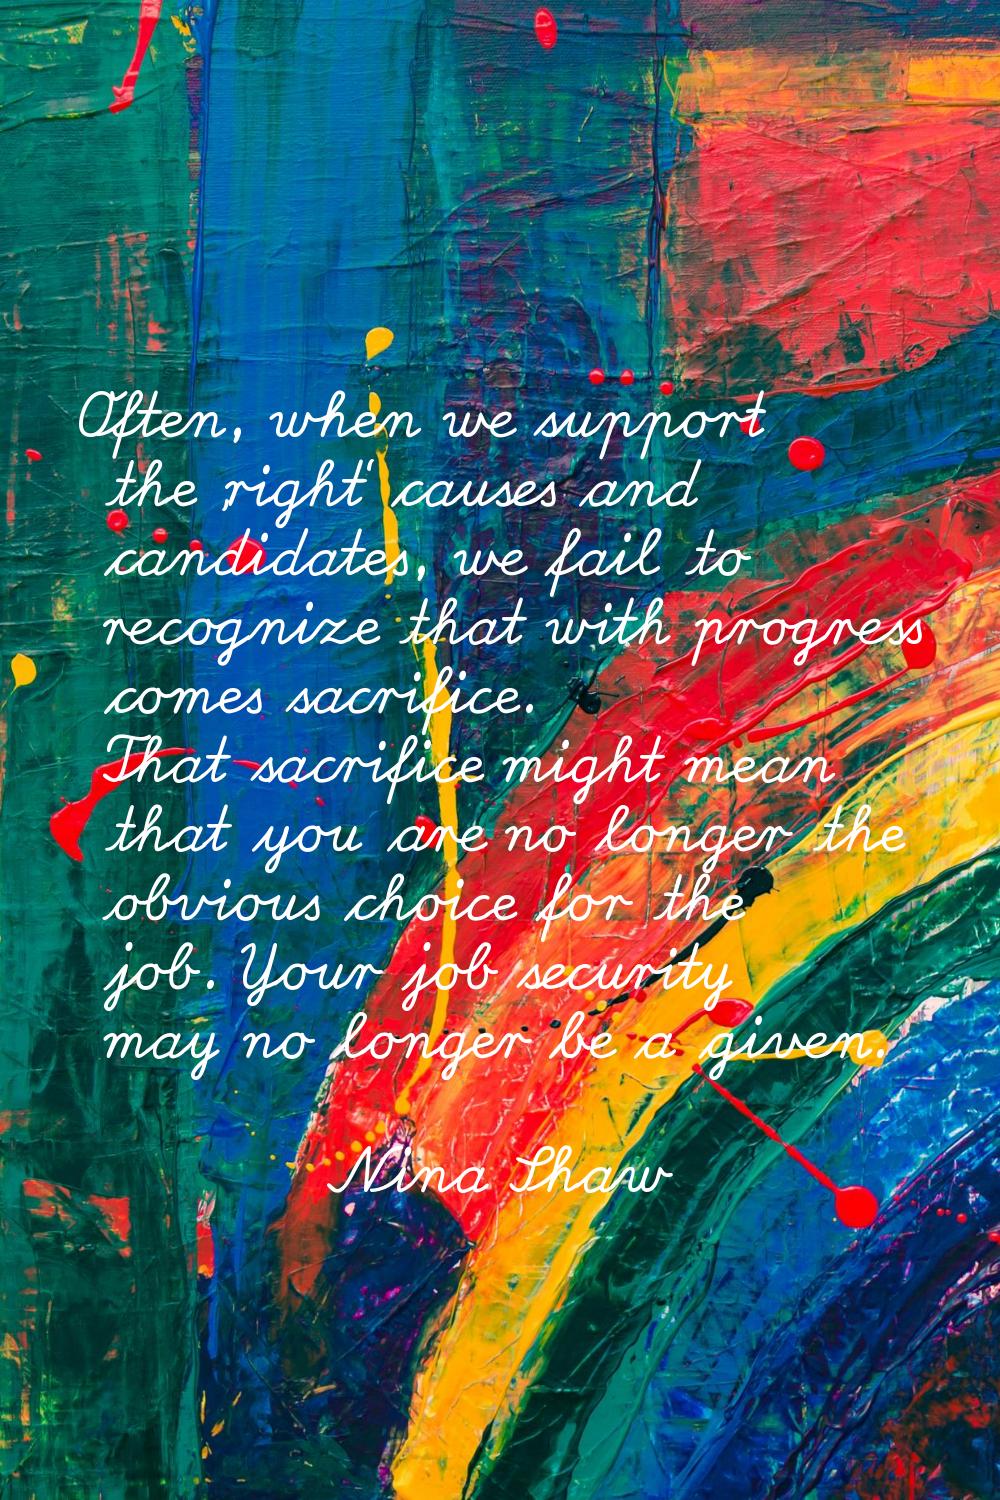 Often, when we support the 'right' causes and candidates, we fail to recognize that with progress c